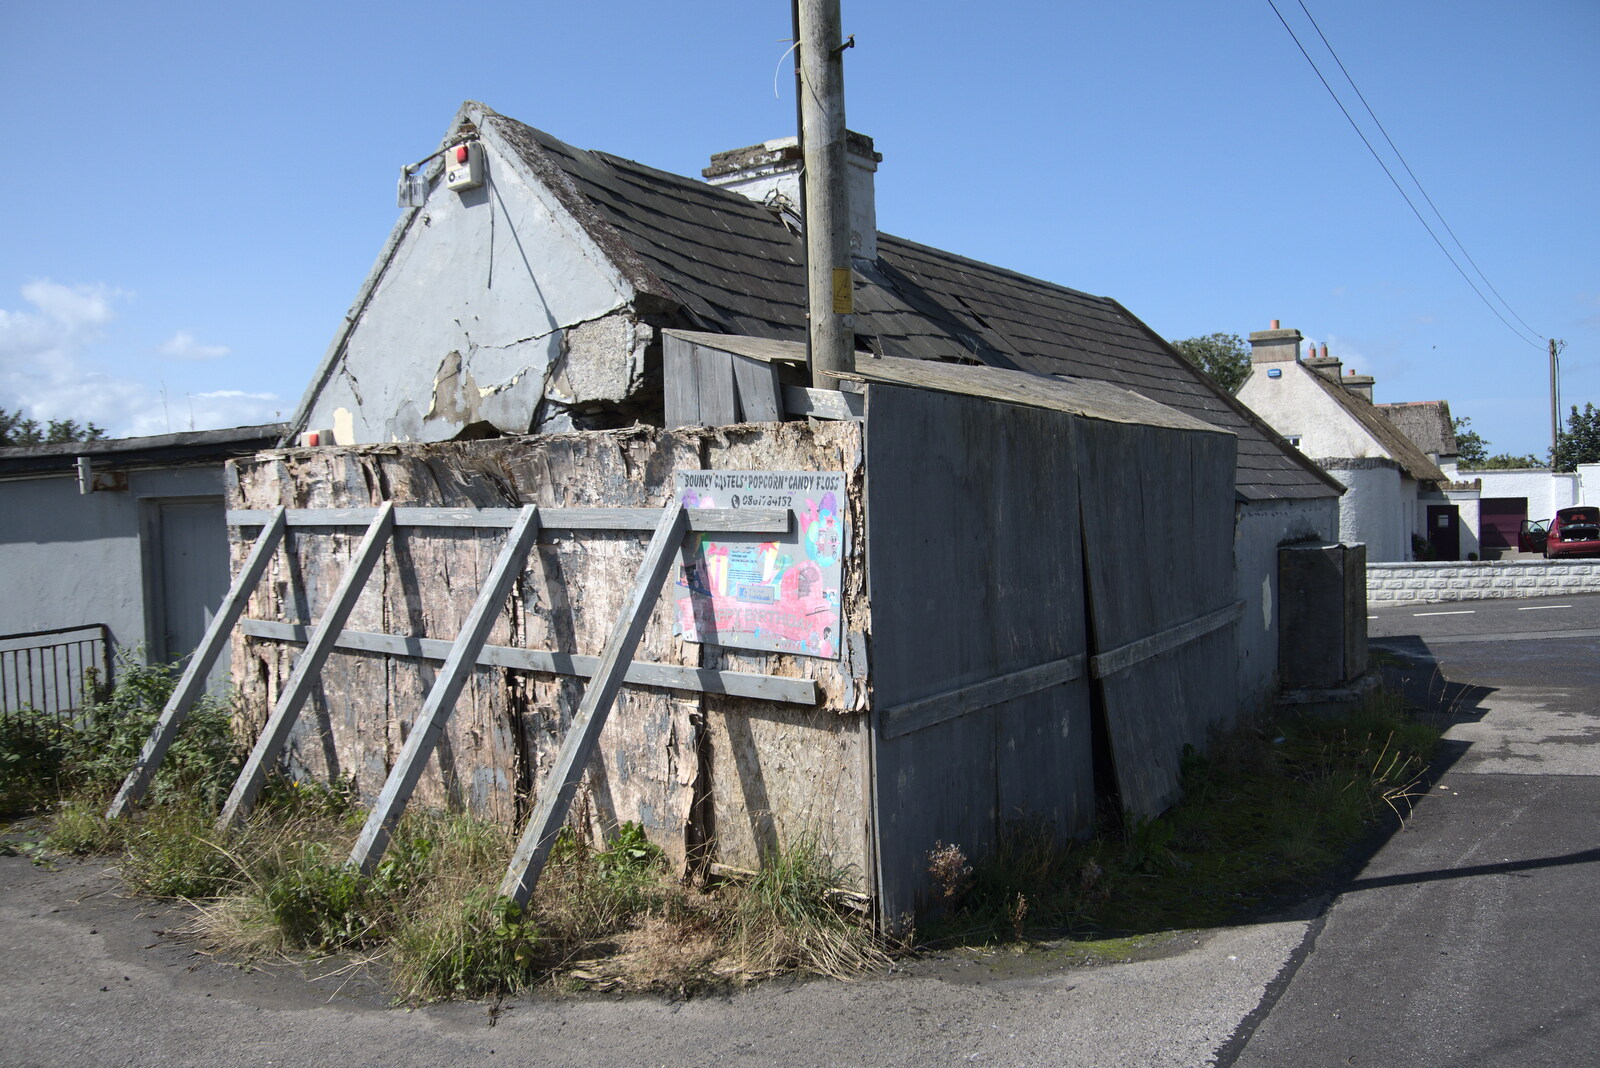 A Trip to Manorhamilton, County Leitrim, Ireland - 11th August 2021: A few timbers stop a cottage from collapsing